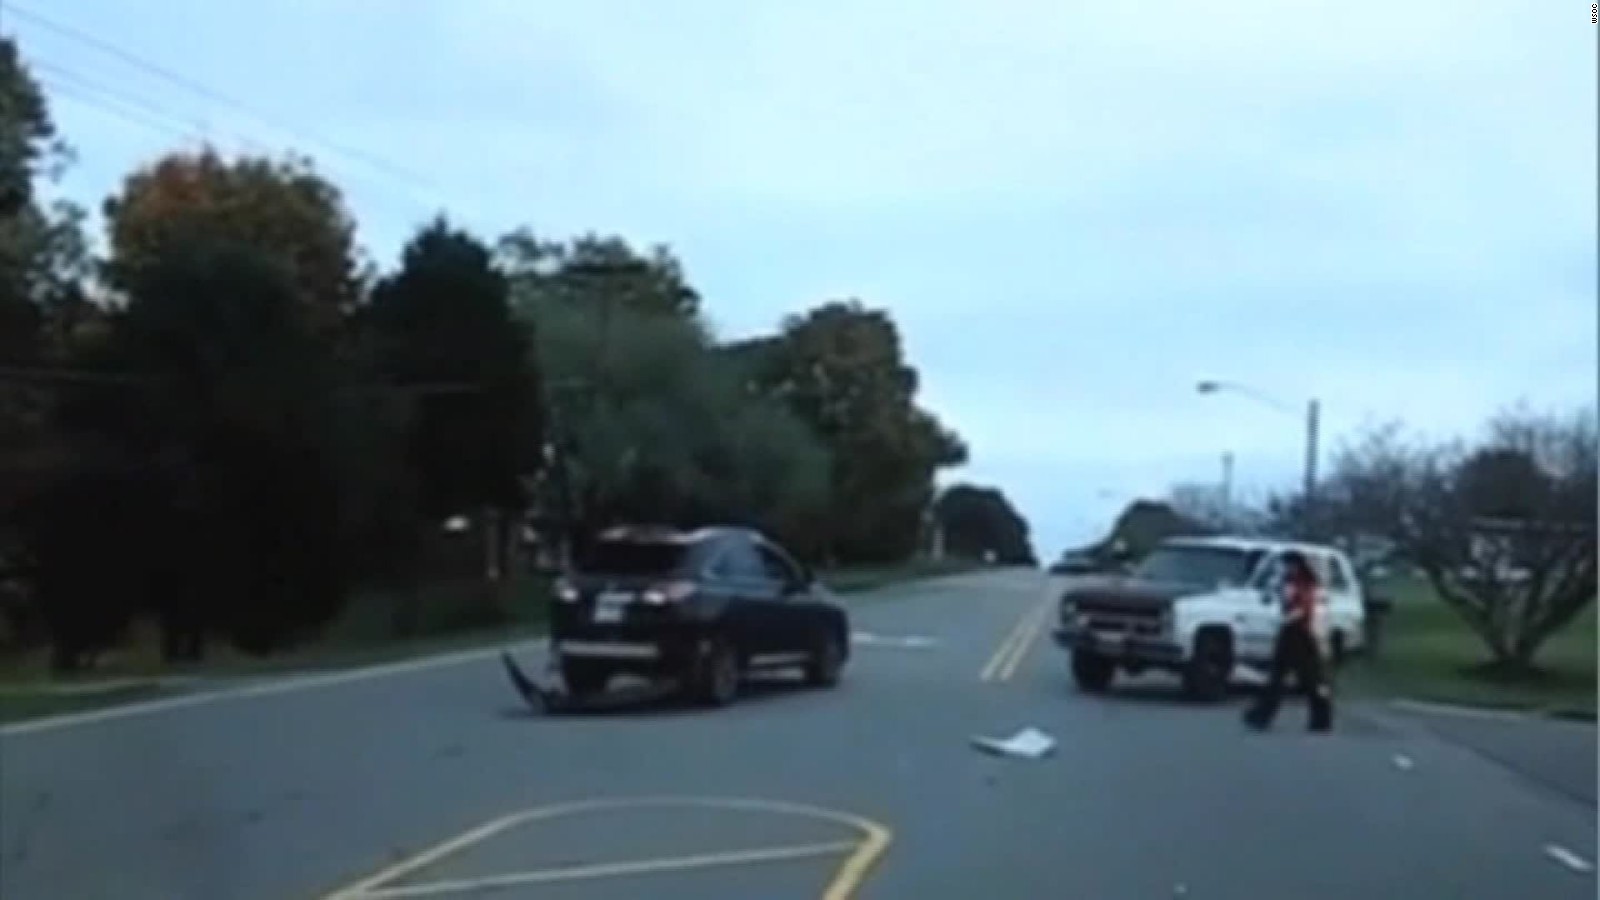 Car runs over motorcyle in road rage incident CNN Video